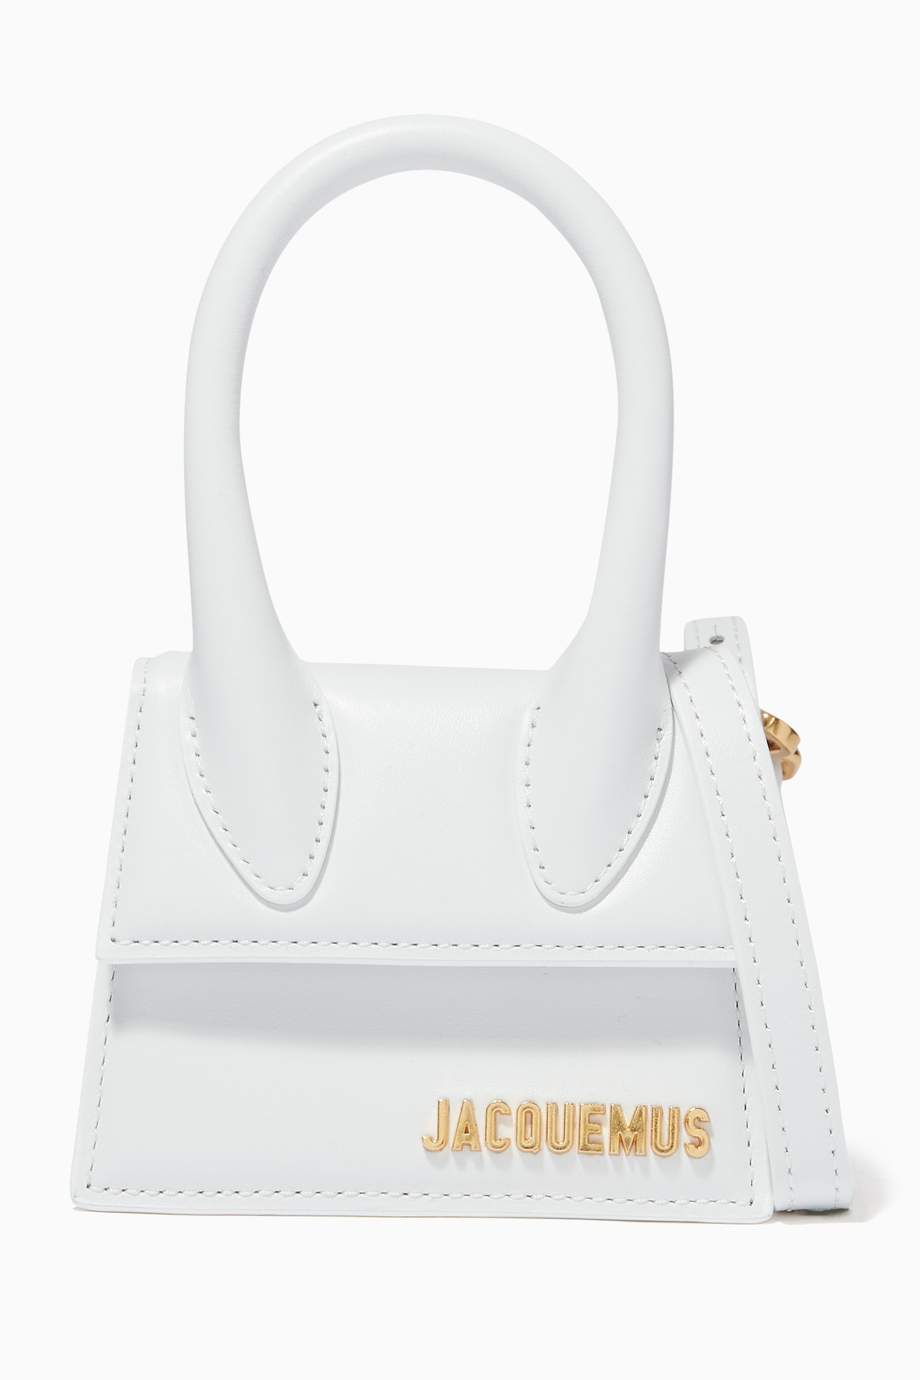 Shop Jacquemus White Le Chiquito Mini Bag in Leather for Women | Ounass UAE